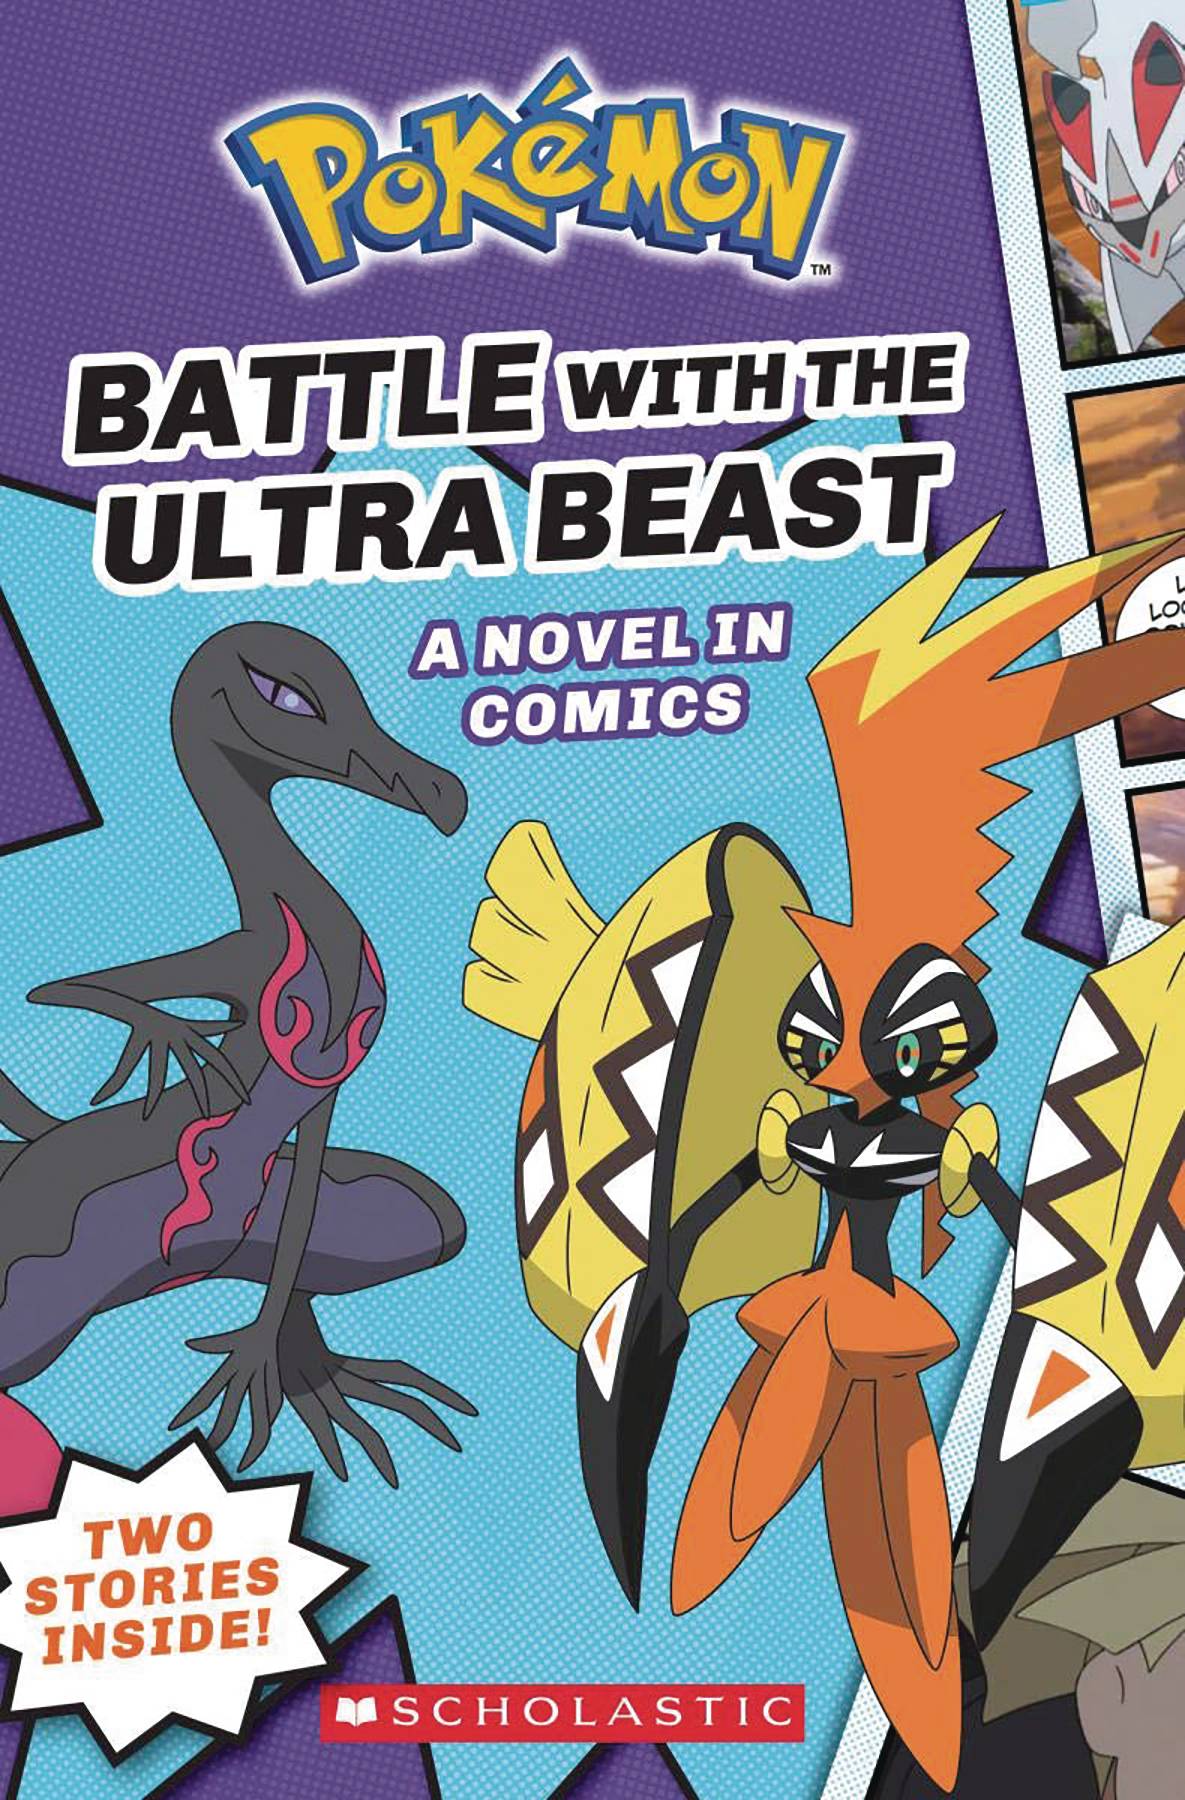 Pokémon Graphic Collected Hardcover Graphic Novel Volume 1 Battle With Ultra Beast